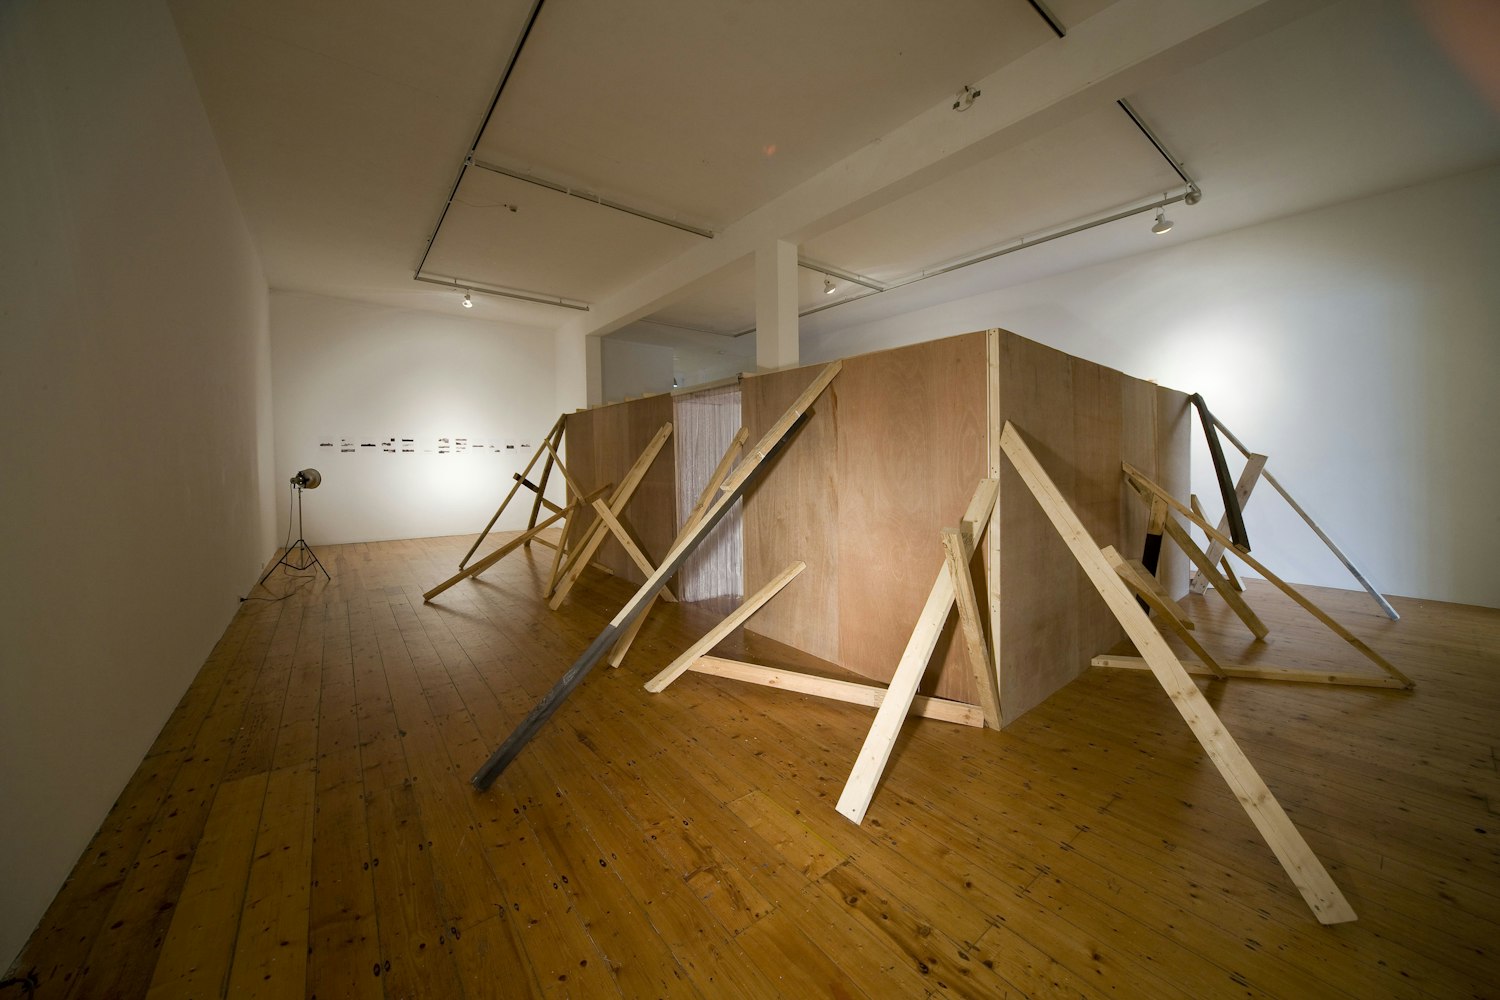 Nicolas Fenouillat, Alternative2Antipode, 2008, installation at Gertrude Contemporary. Image courtesy of the Gertrude Contemporary archives.